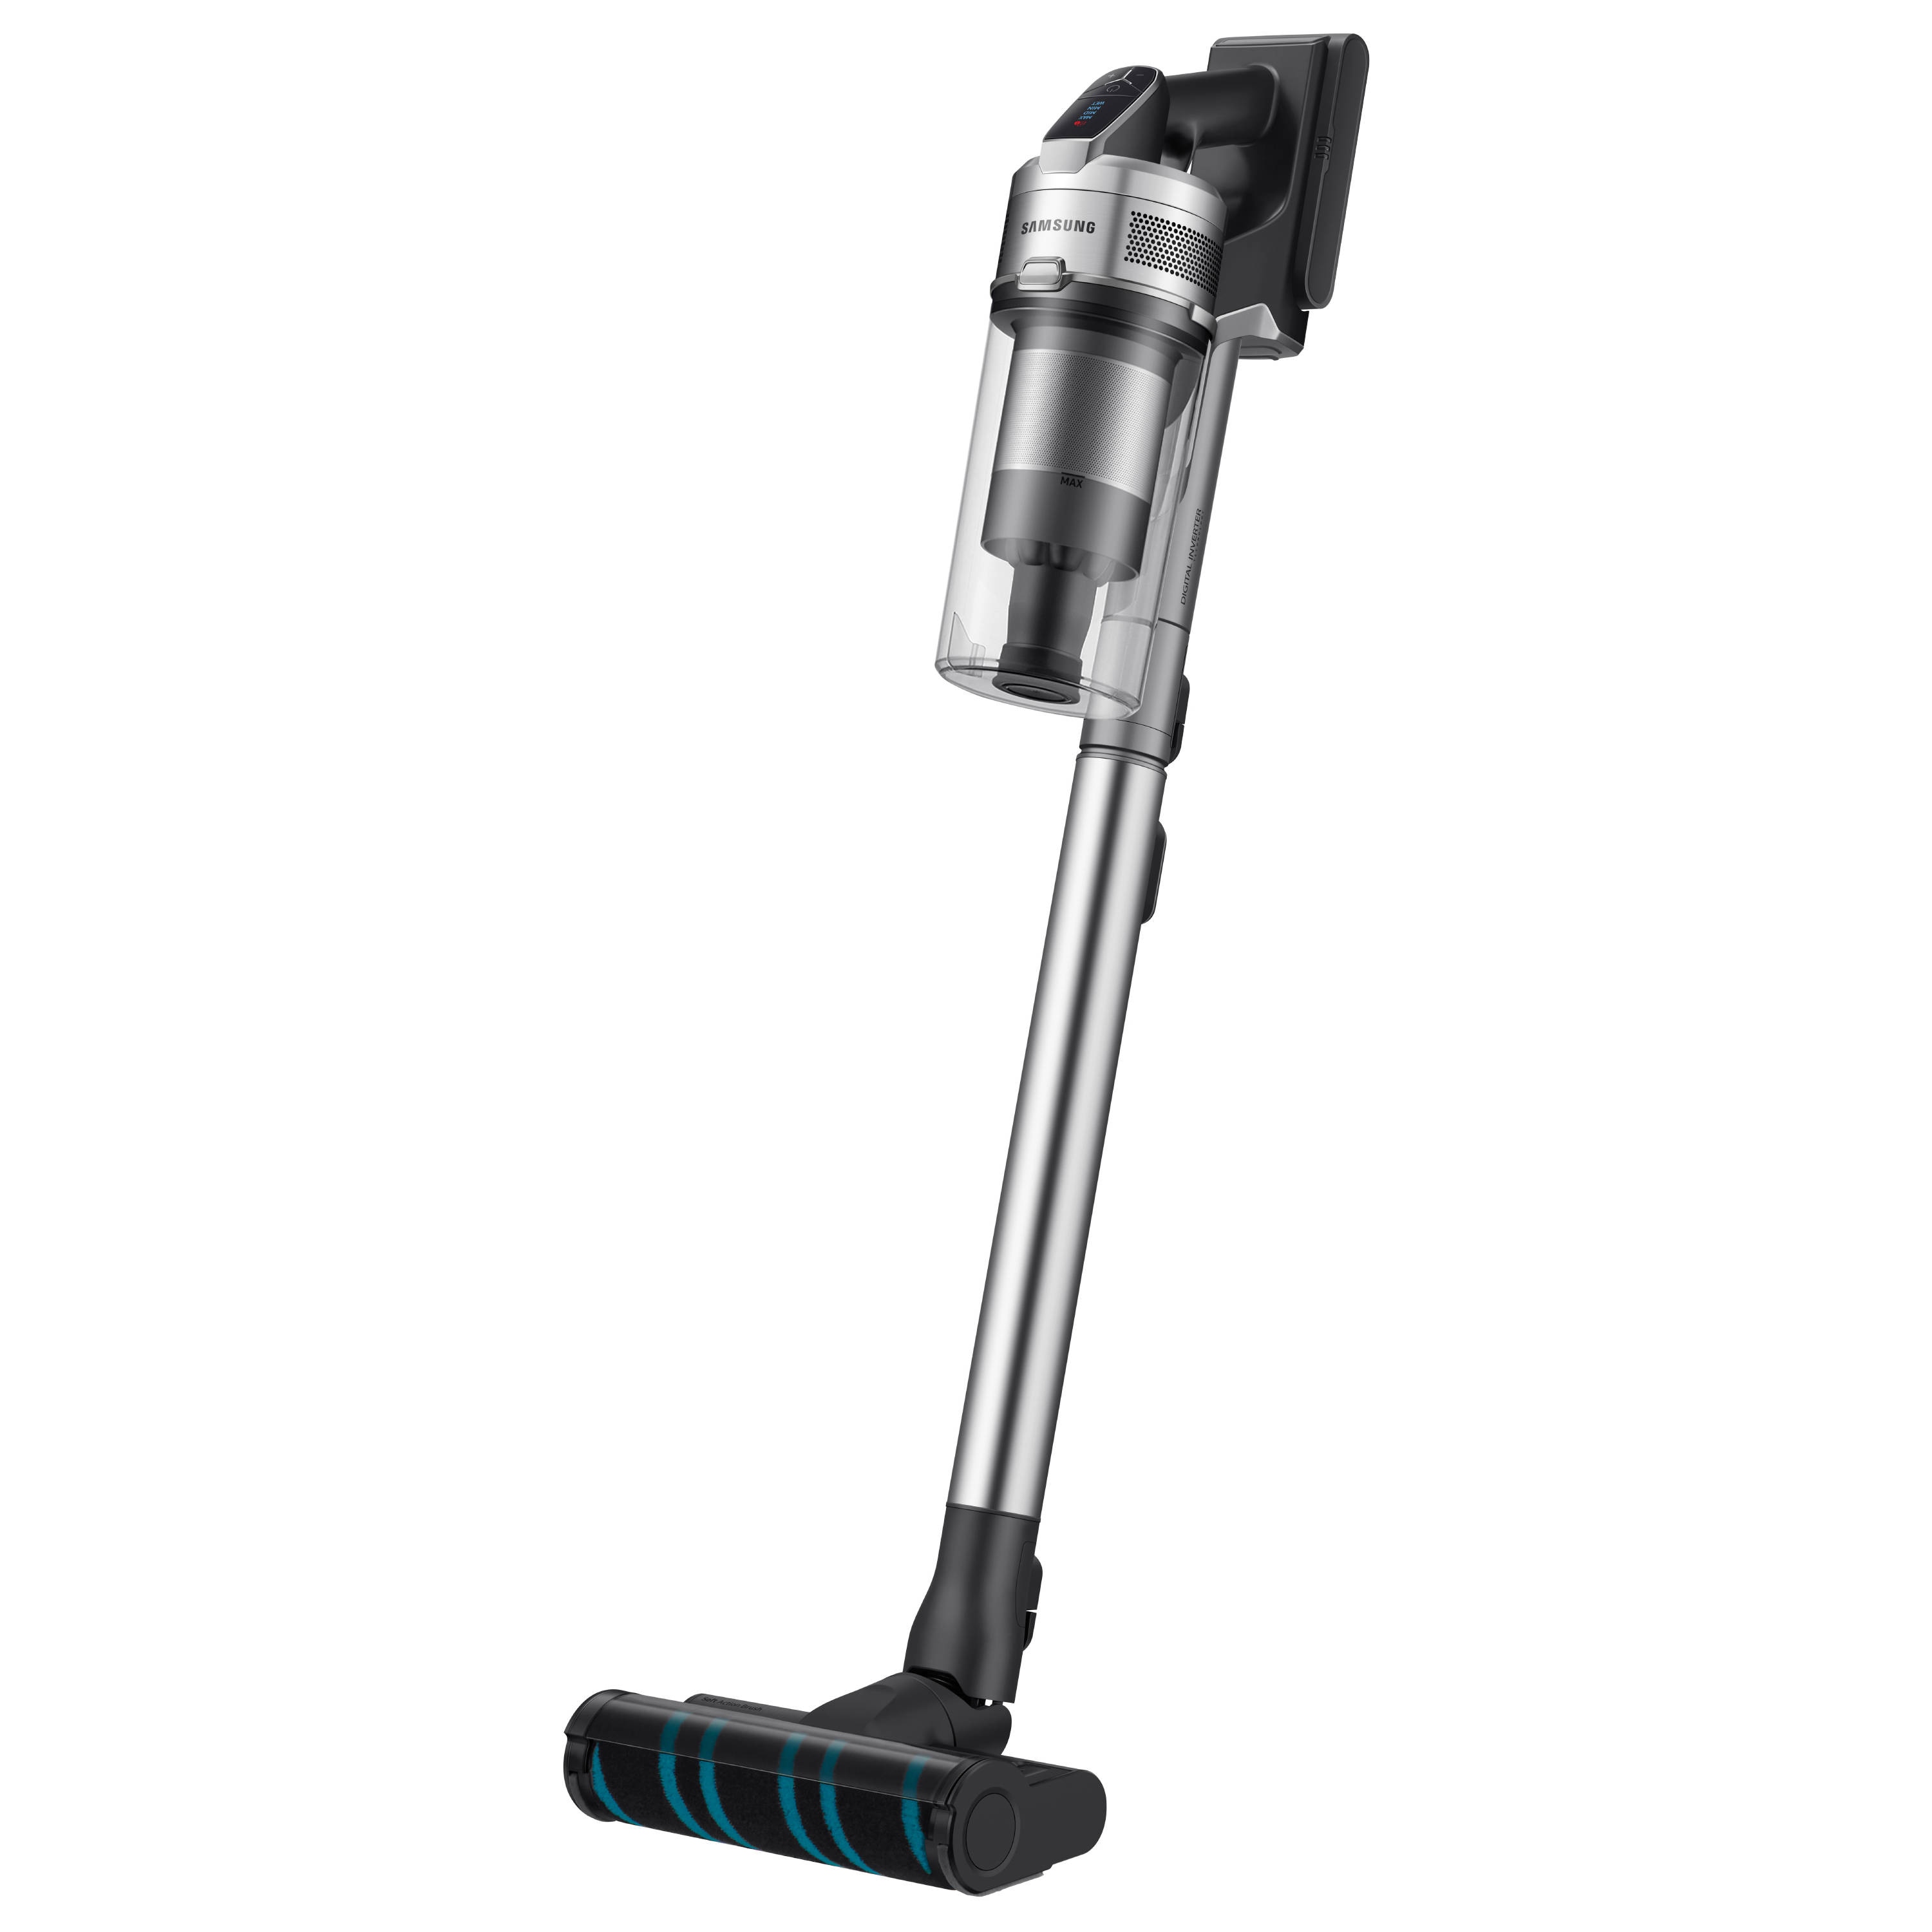 Samsung Jet 90 Bundle department Cordless Volt Vacuum Pet 21.9 Stick Vacuums (Convertible in To Stick Station the at and Clean Handheld)